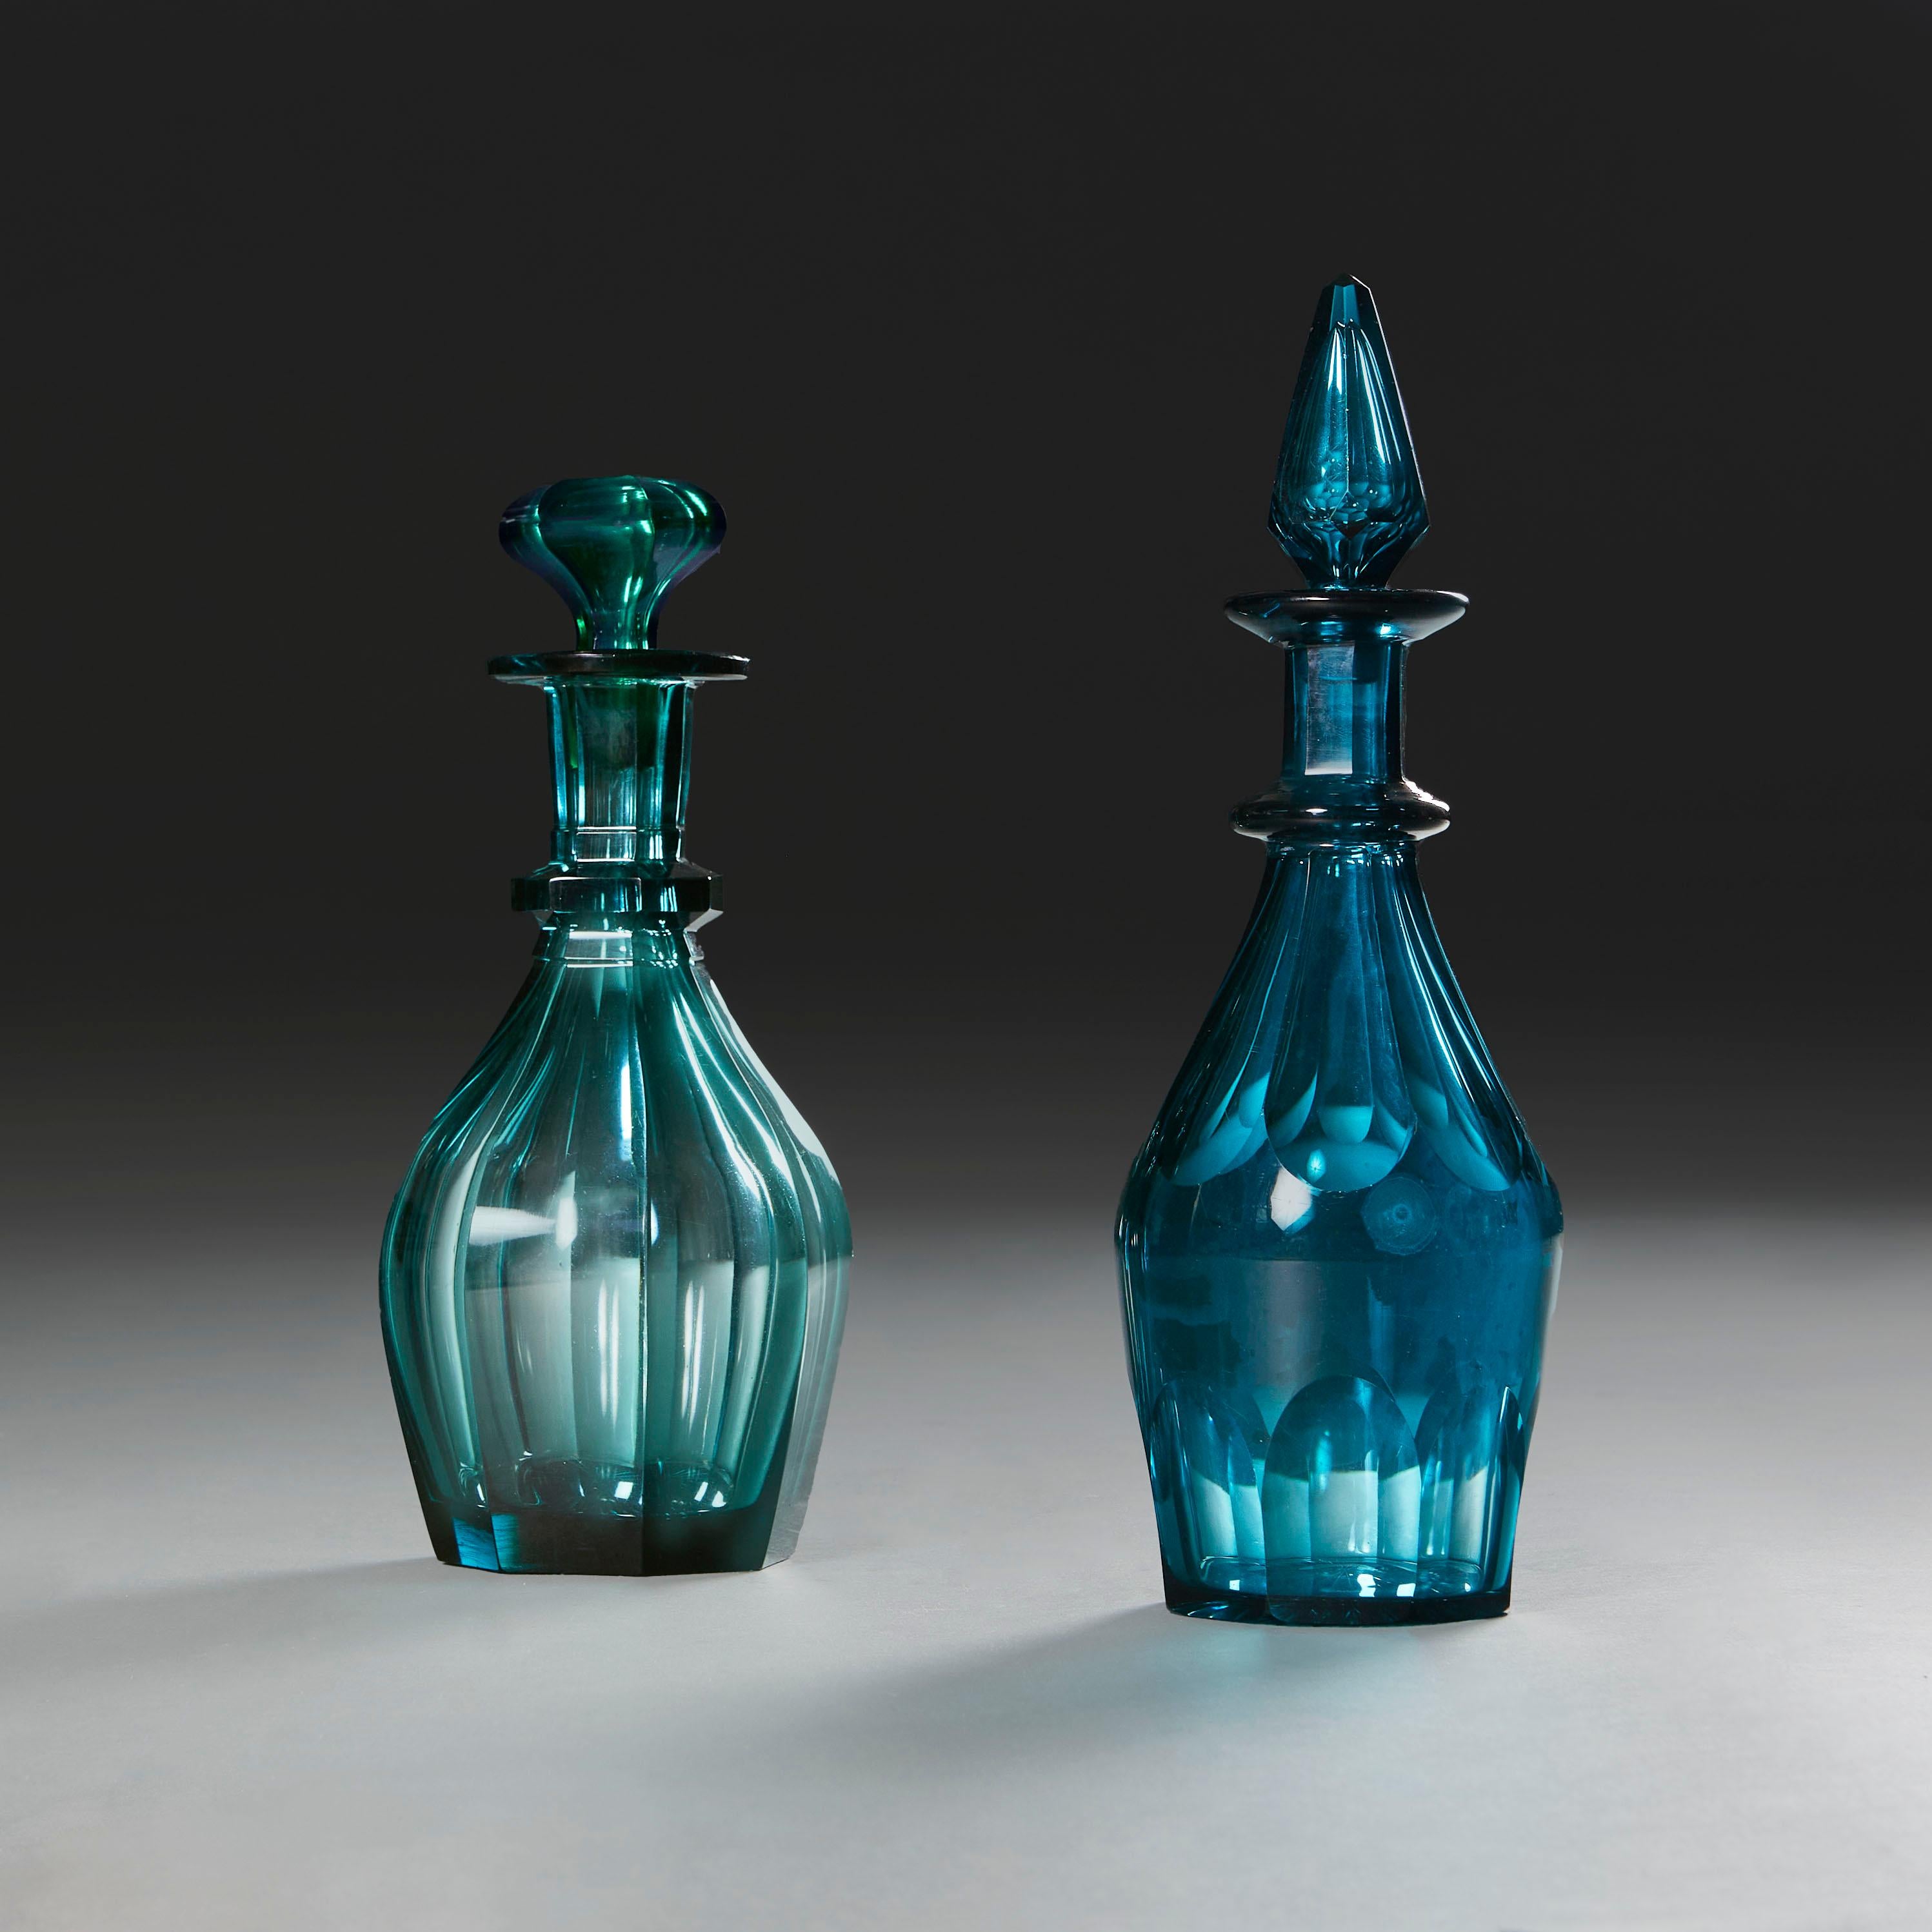 England, circa 1820

Two Regency cut glass spirit decanters, one blue, one turquoise, with faceted sides and stoppers.

£850 GBP each, or £1,700 GBP for the pair.

Height of taller           33.00cm
Height of smaller      29.00cm